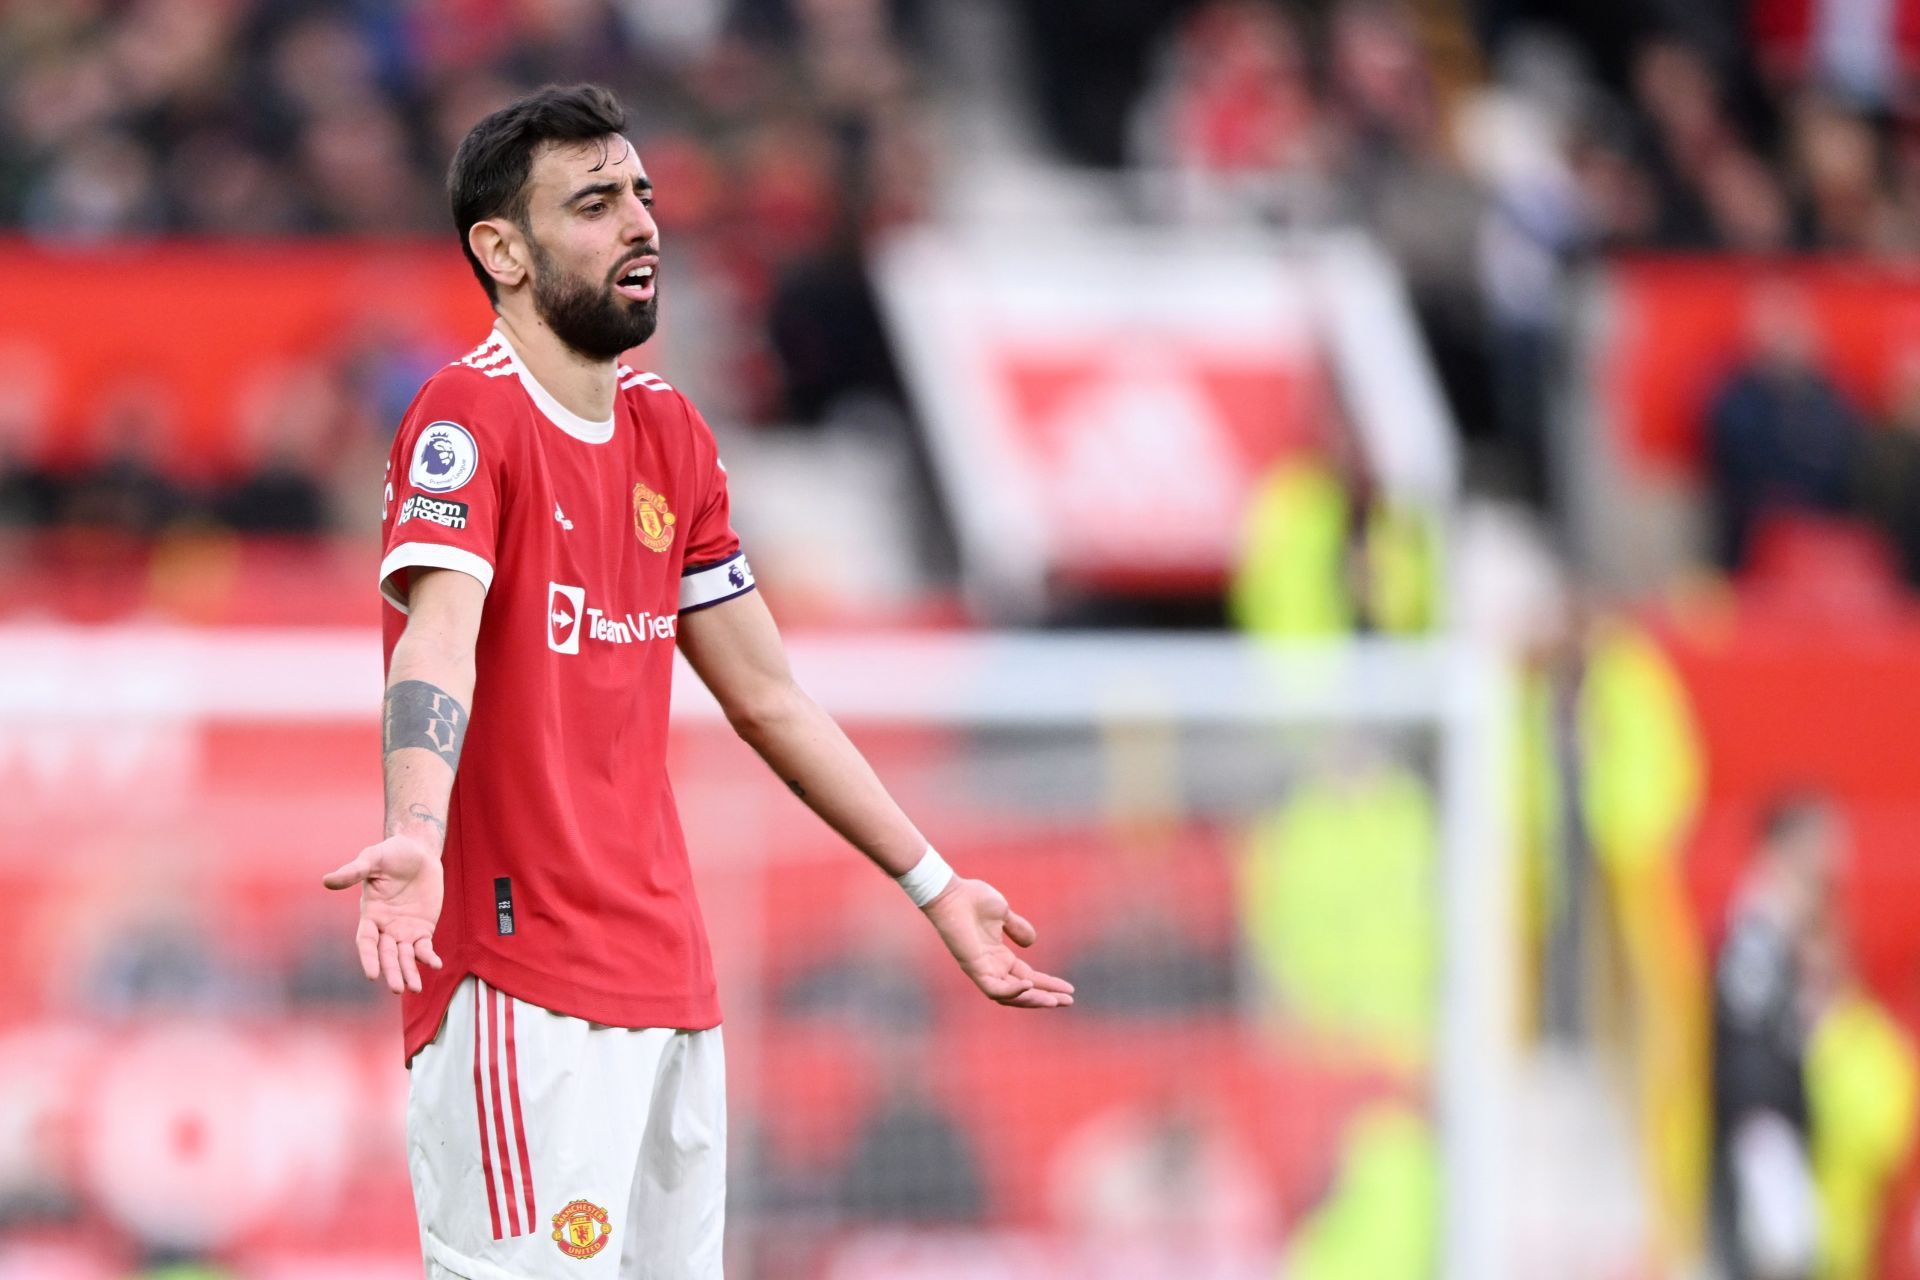 Bruno Fernandes has been very influential in the Manchester United squad